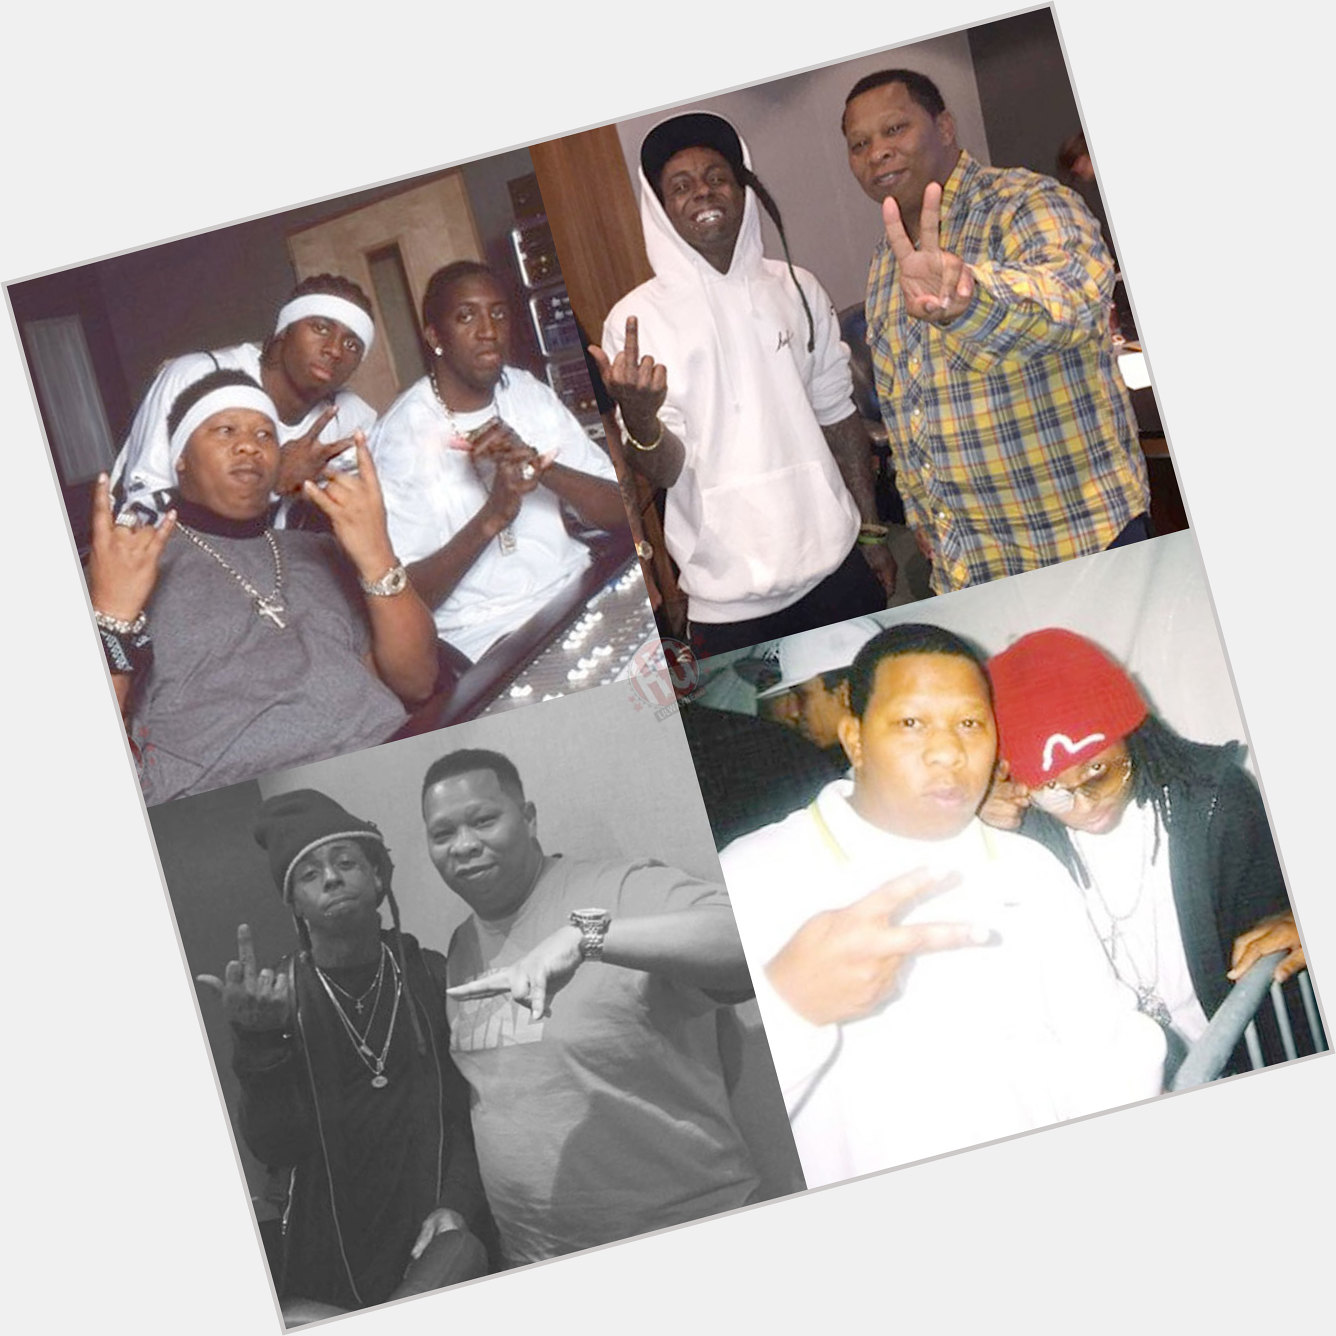 Happy birthday to Mannie Fresh! What is your favorite Mannie and Lil Wayne collaboration? 